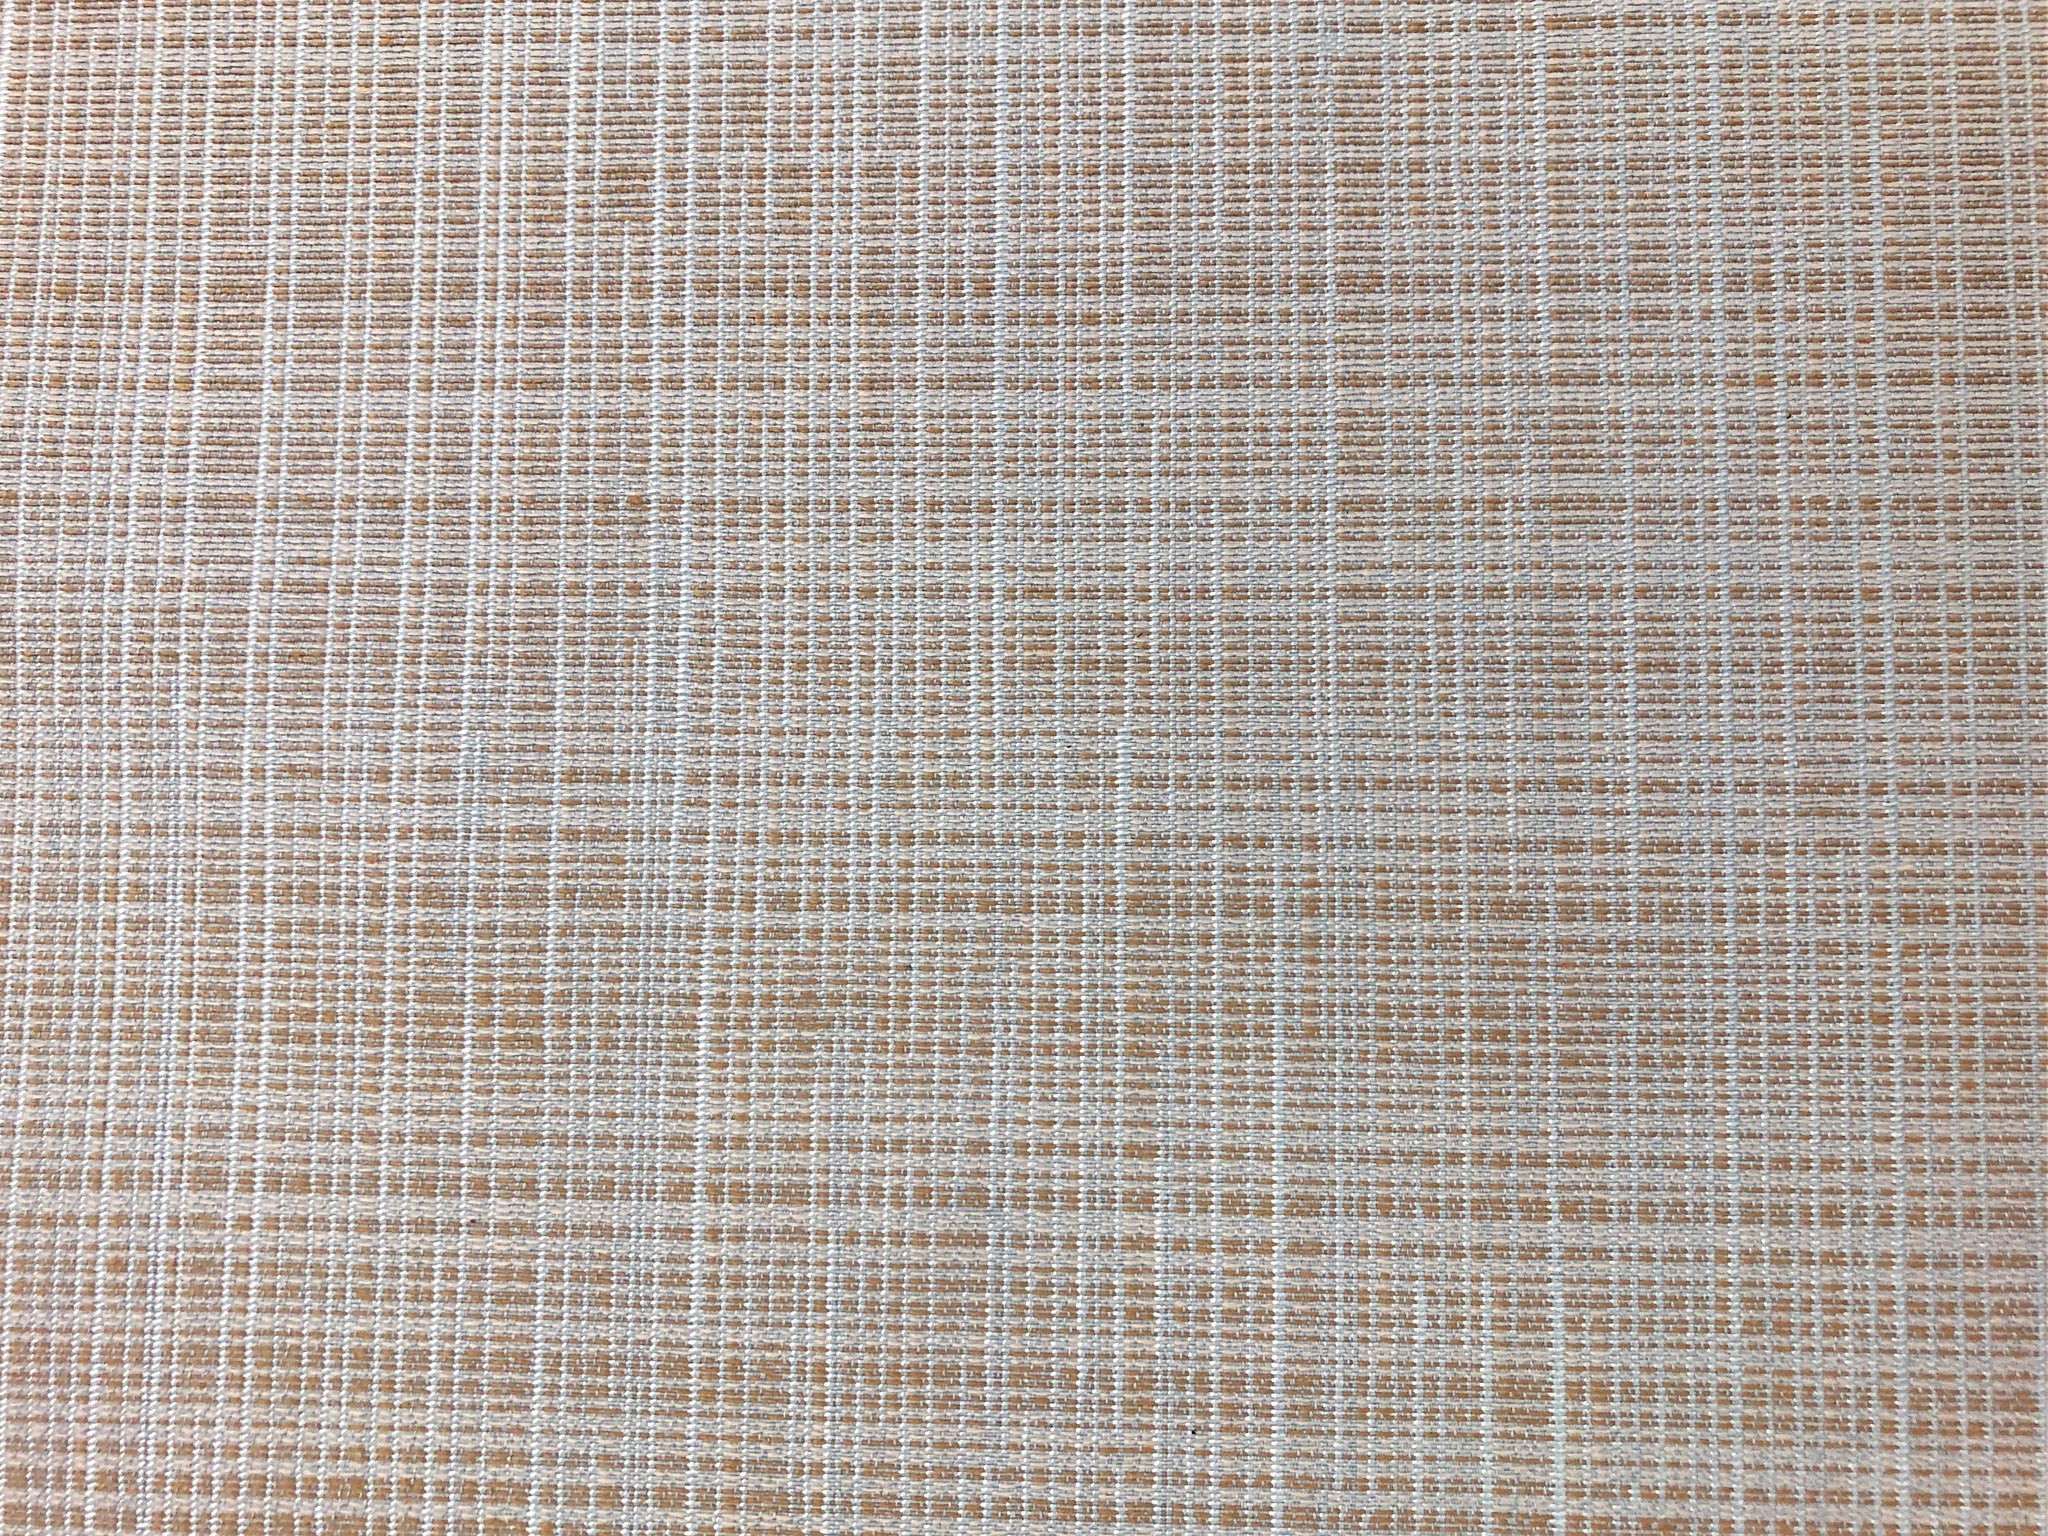 blue and brown fabric texture